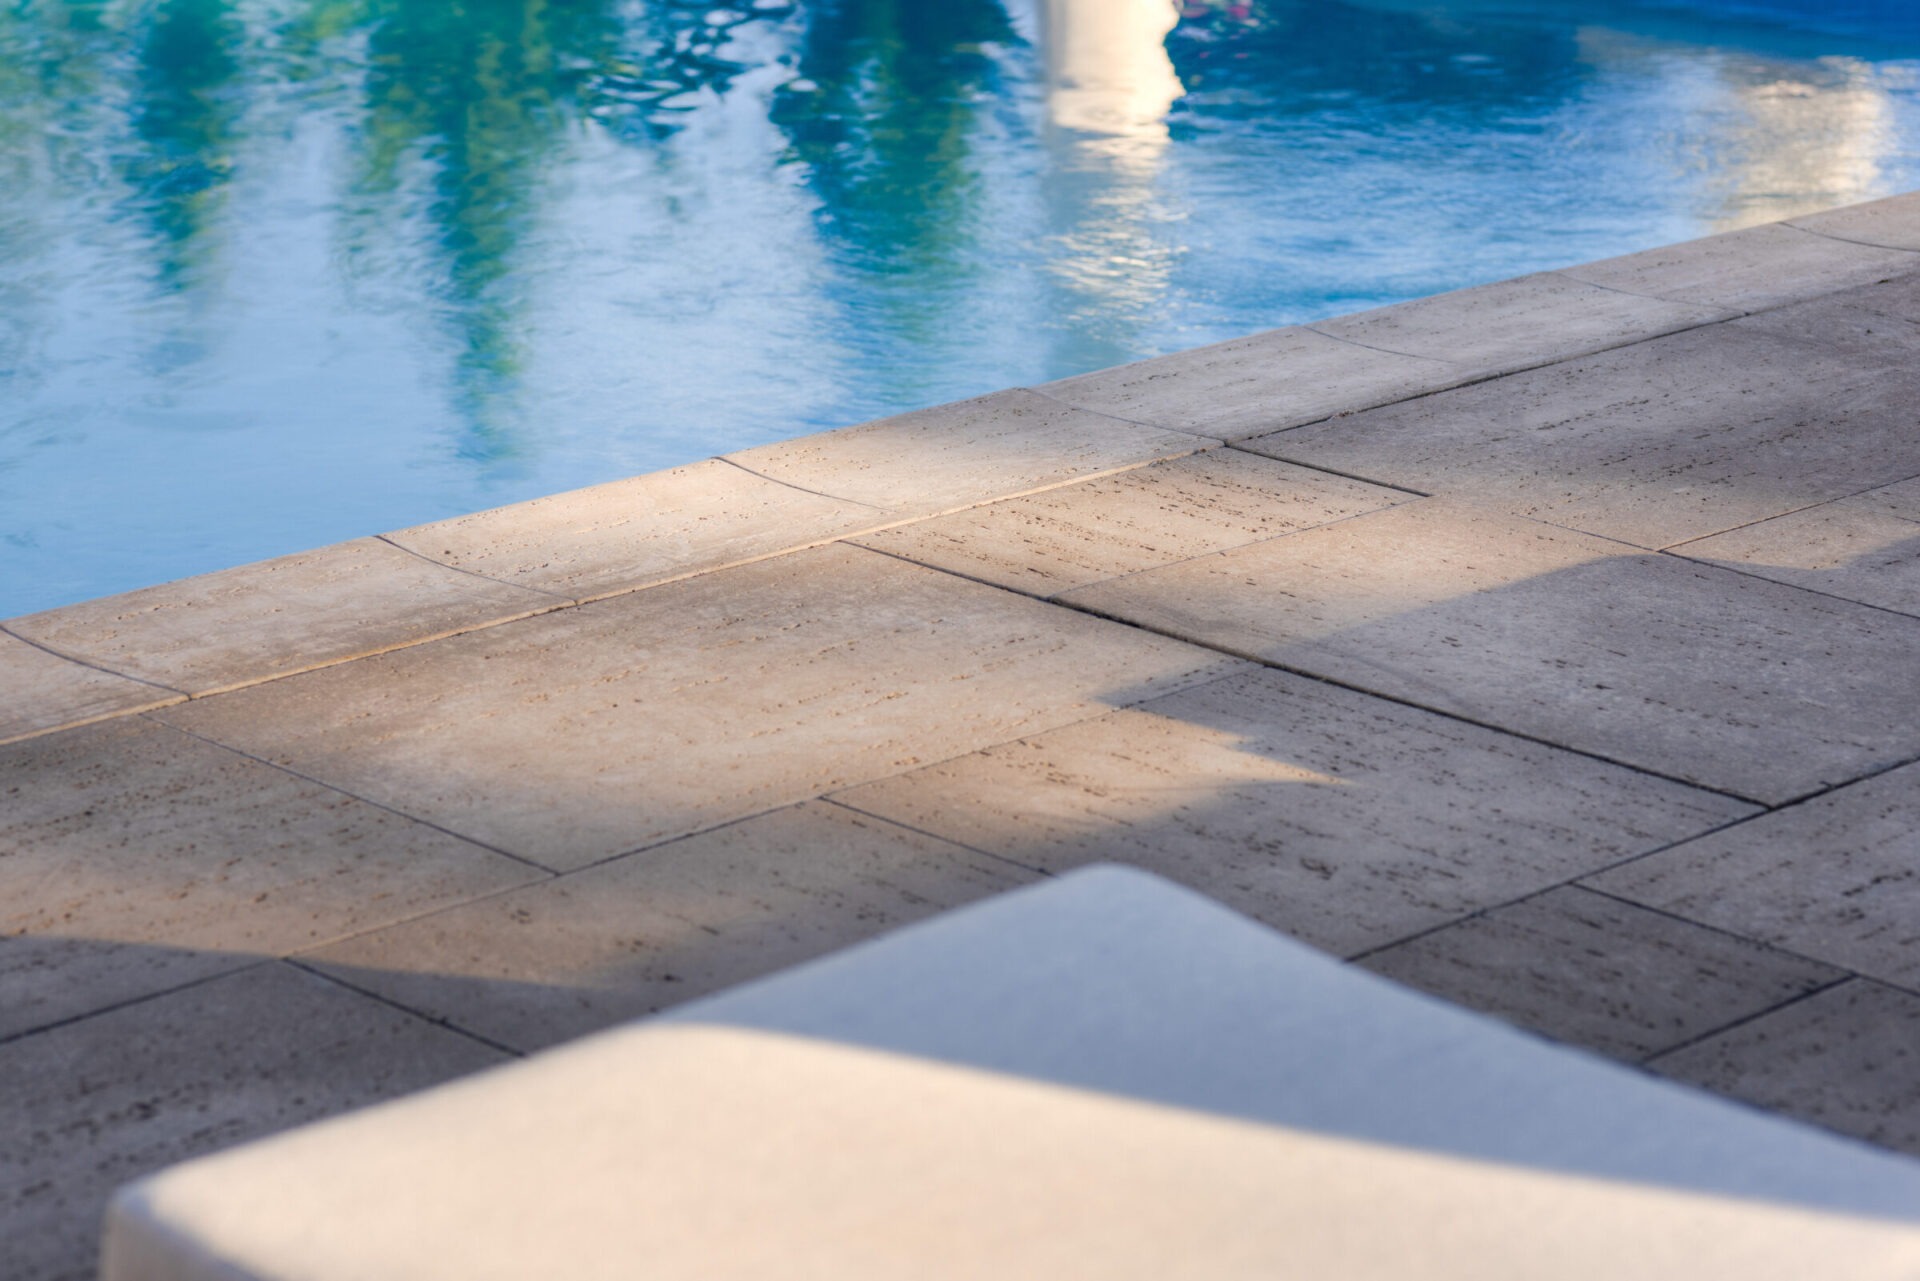 This is a tranquil scene showing the edge of a swimming pool with clear, reflective water, bordered by neatly laid beige tiles and a white ledge.